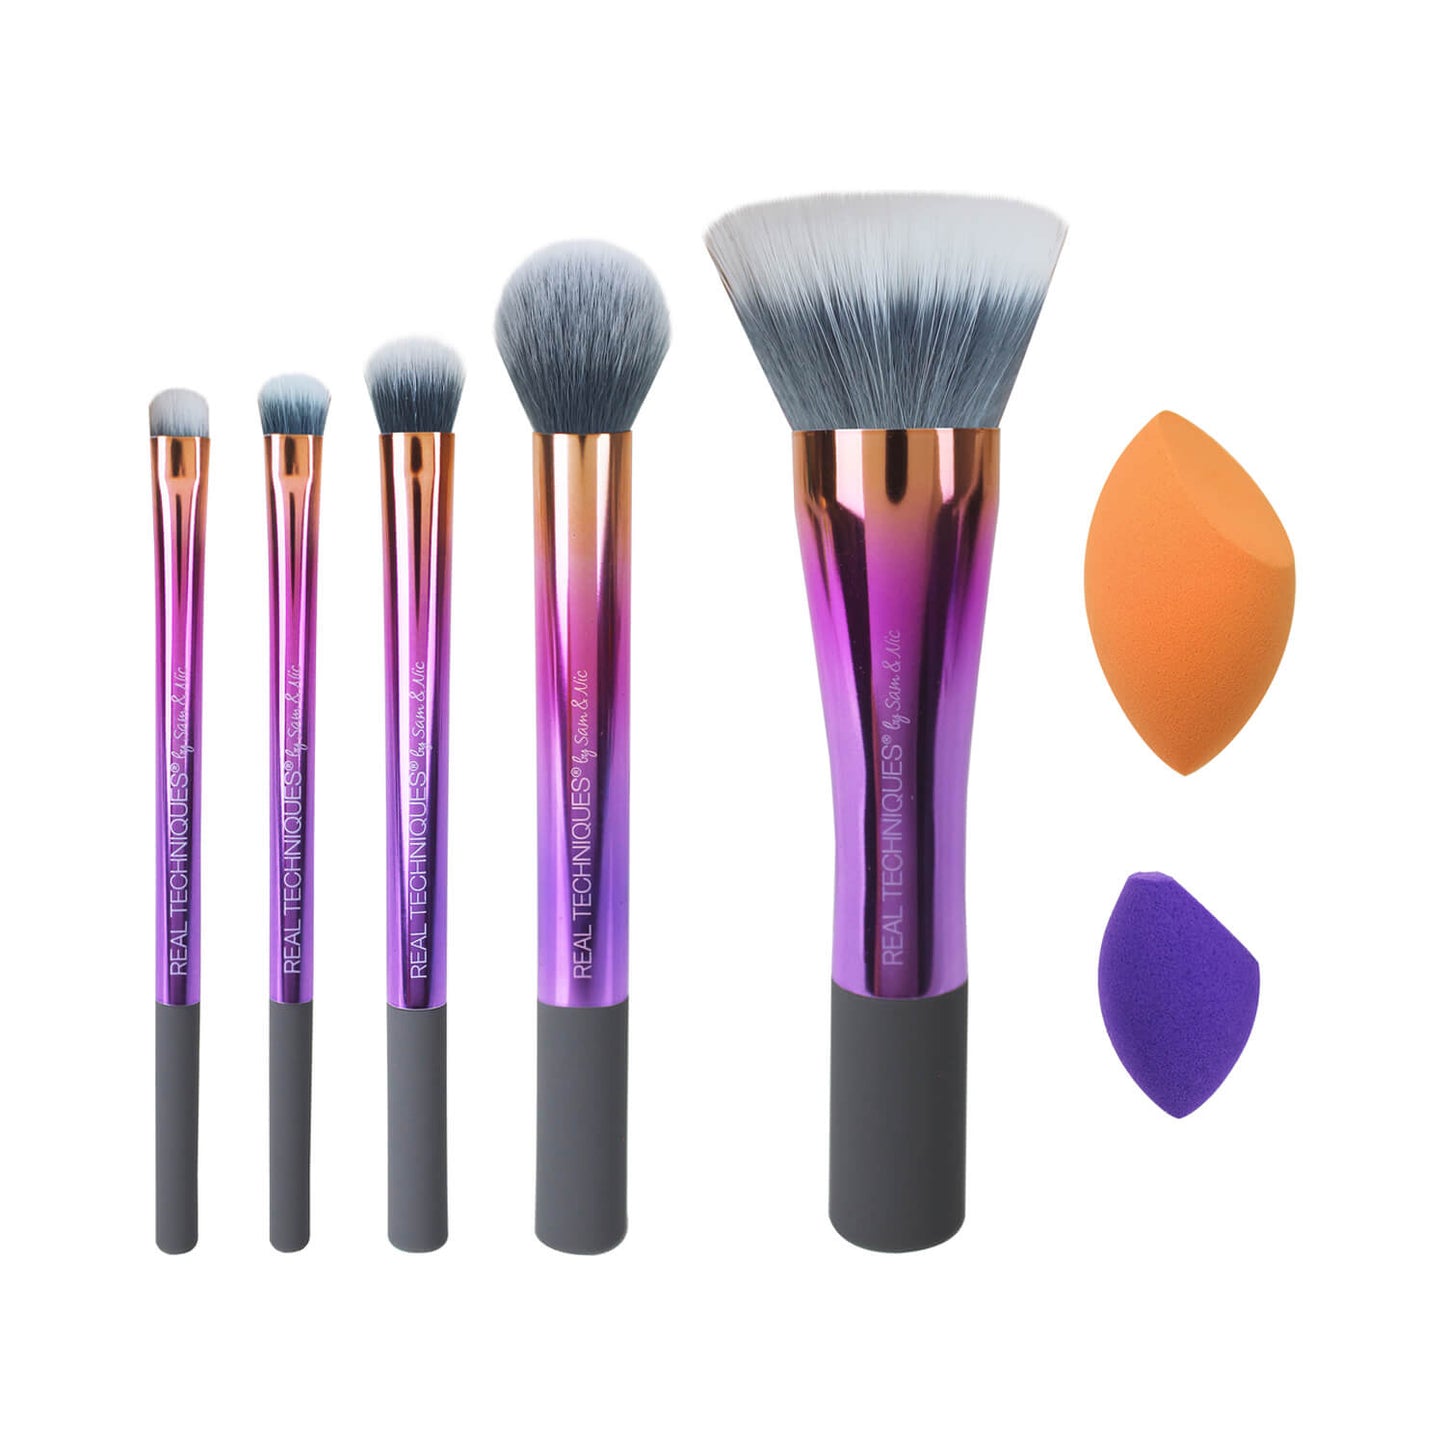 Real Techniques Limited Edition Illuminate + Accentuate Set